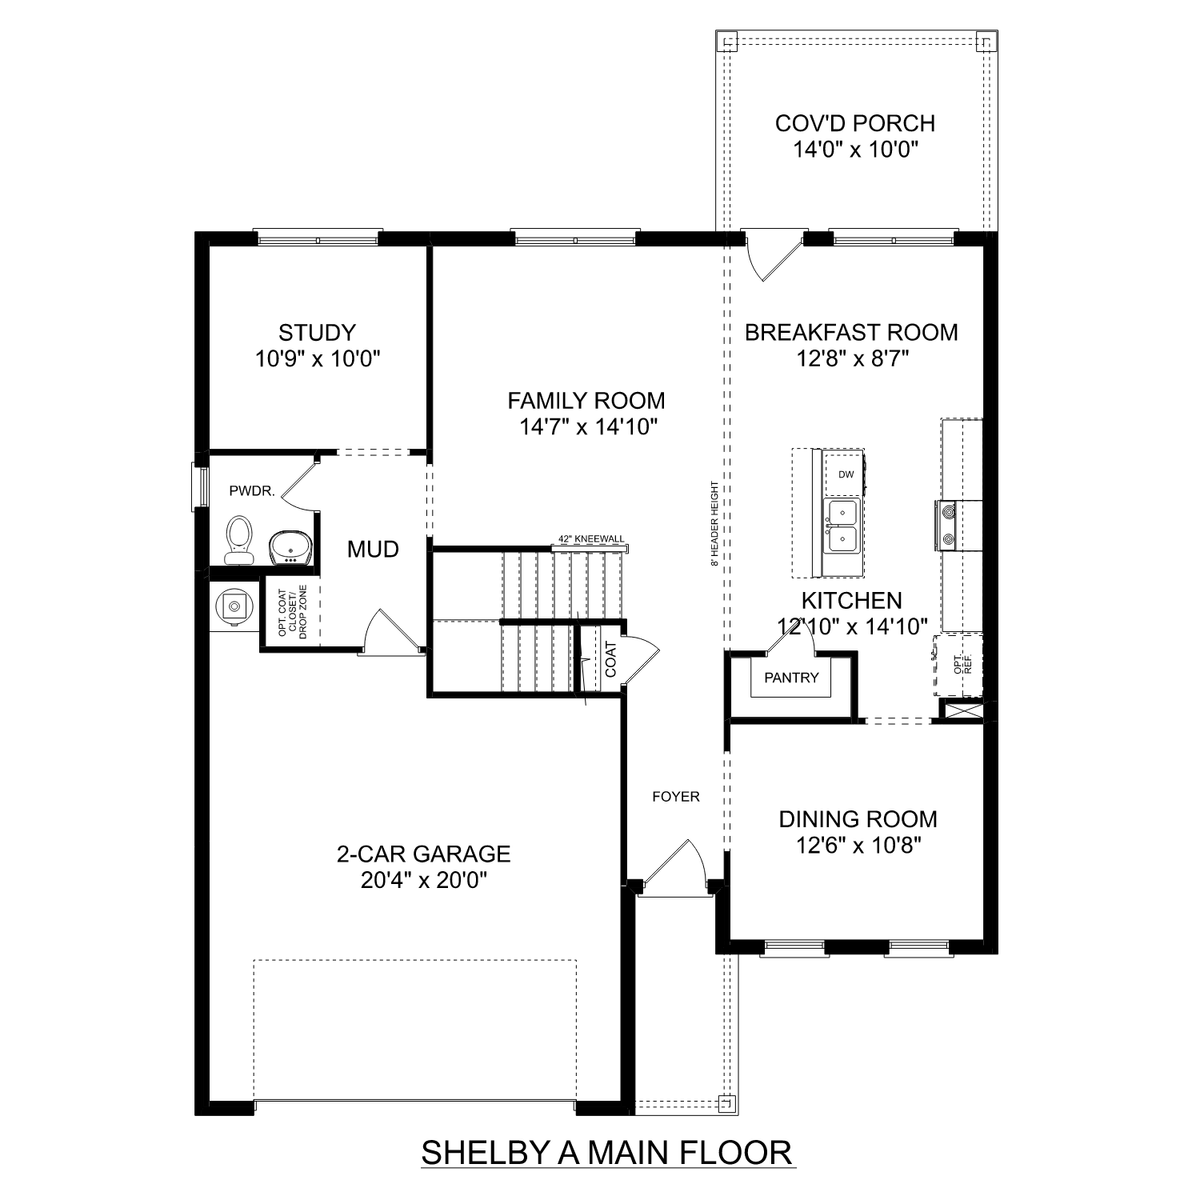 1 - The Shelby A buildable floor plan layout in Davidson Homes' Cain Park community.